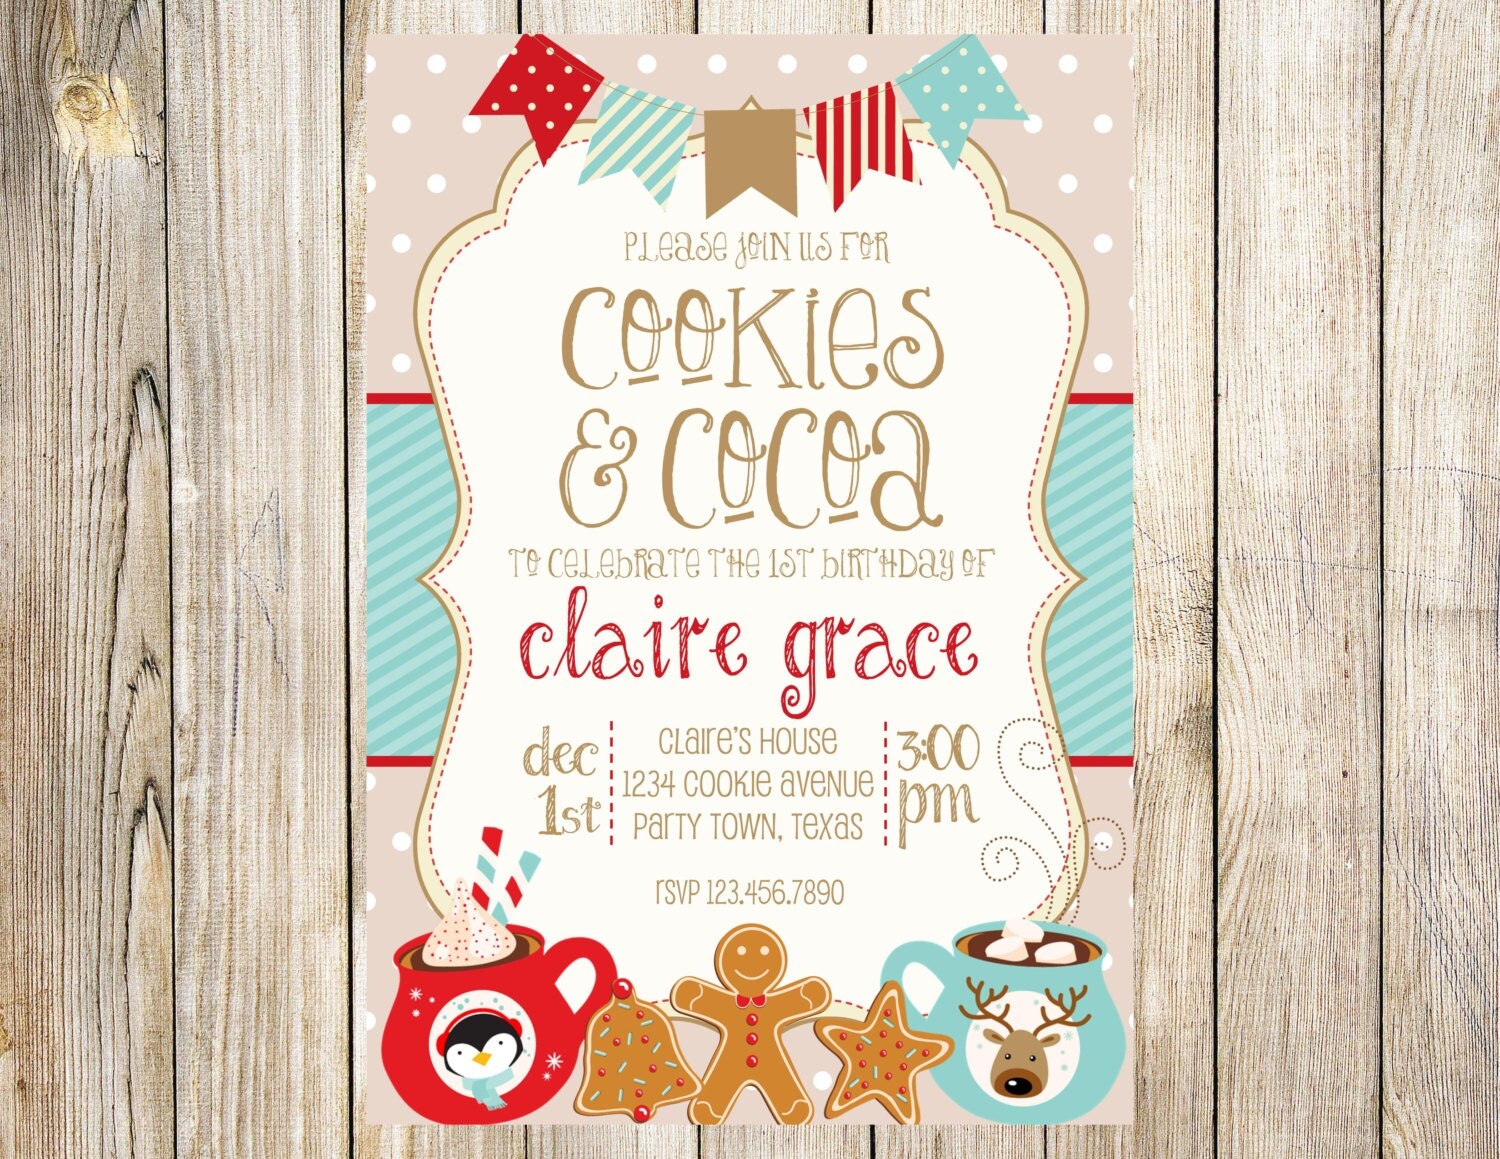 cookies-and-cocoa-invitation-by-emmyjosparties-on-etsy